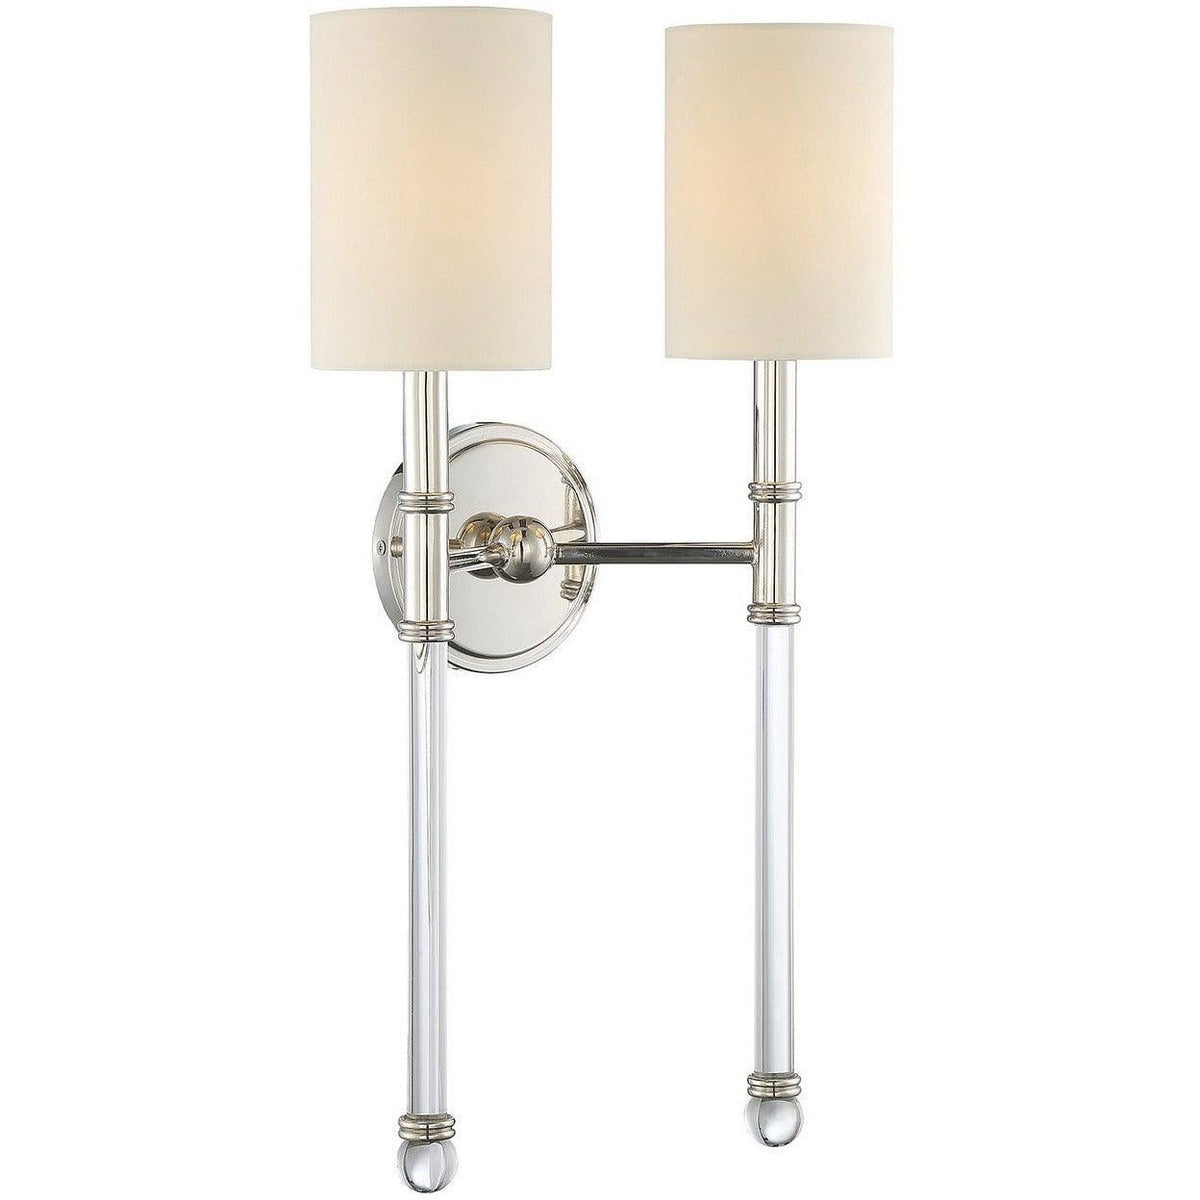 Savoy House - Fremont Two Light Wall Sconce - 9-103-2-109 | Montreal Lighting & Hardware